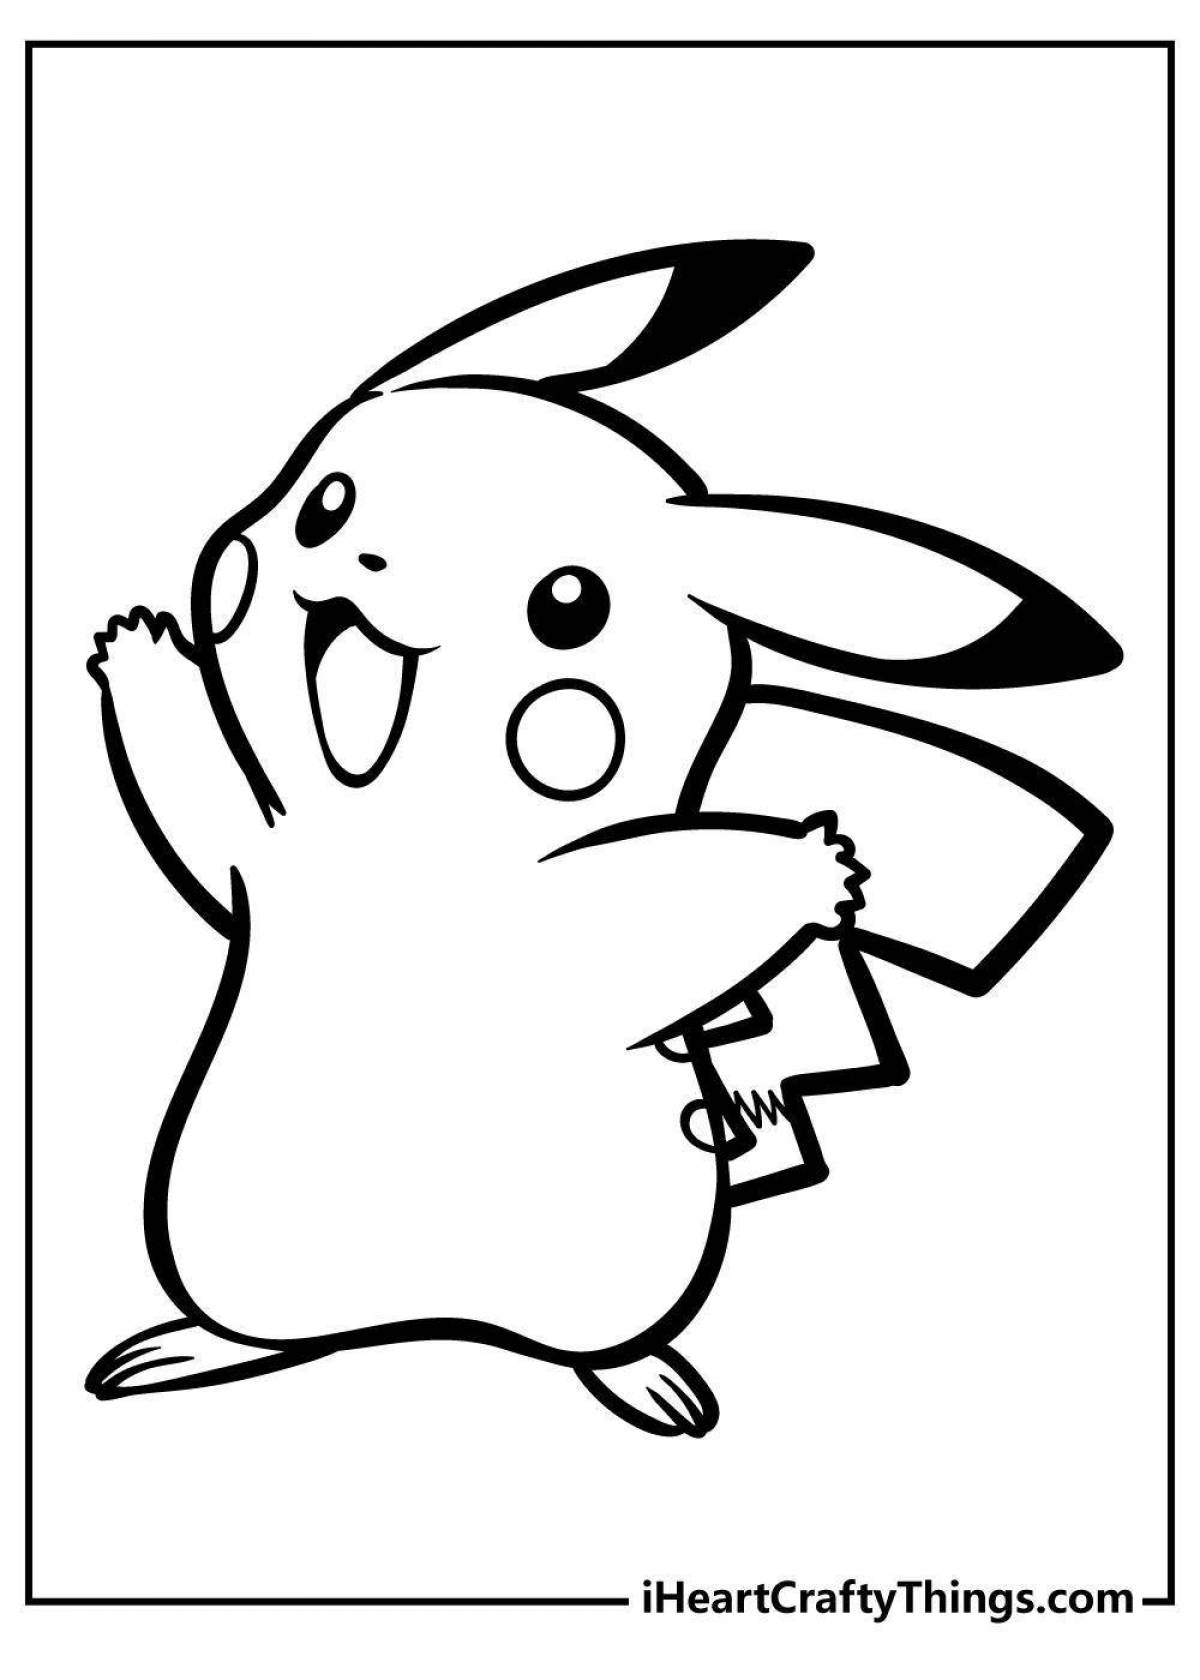 Coloring love pikachu with a heart